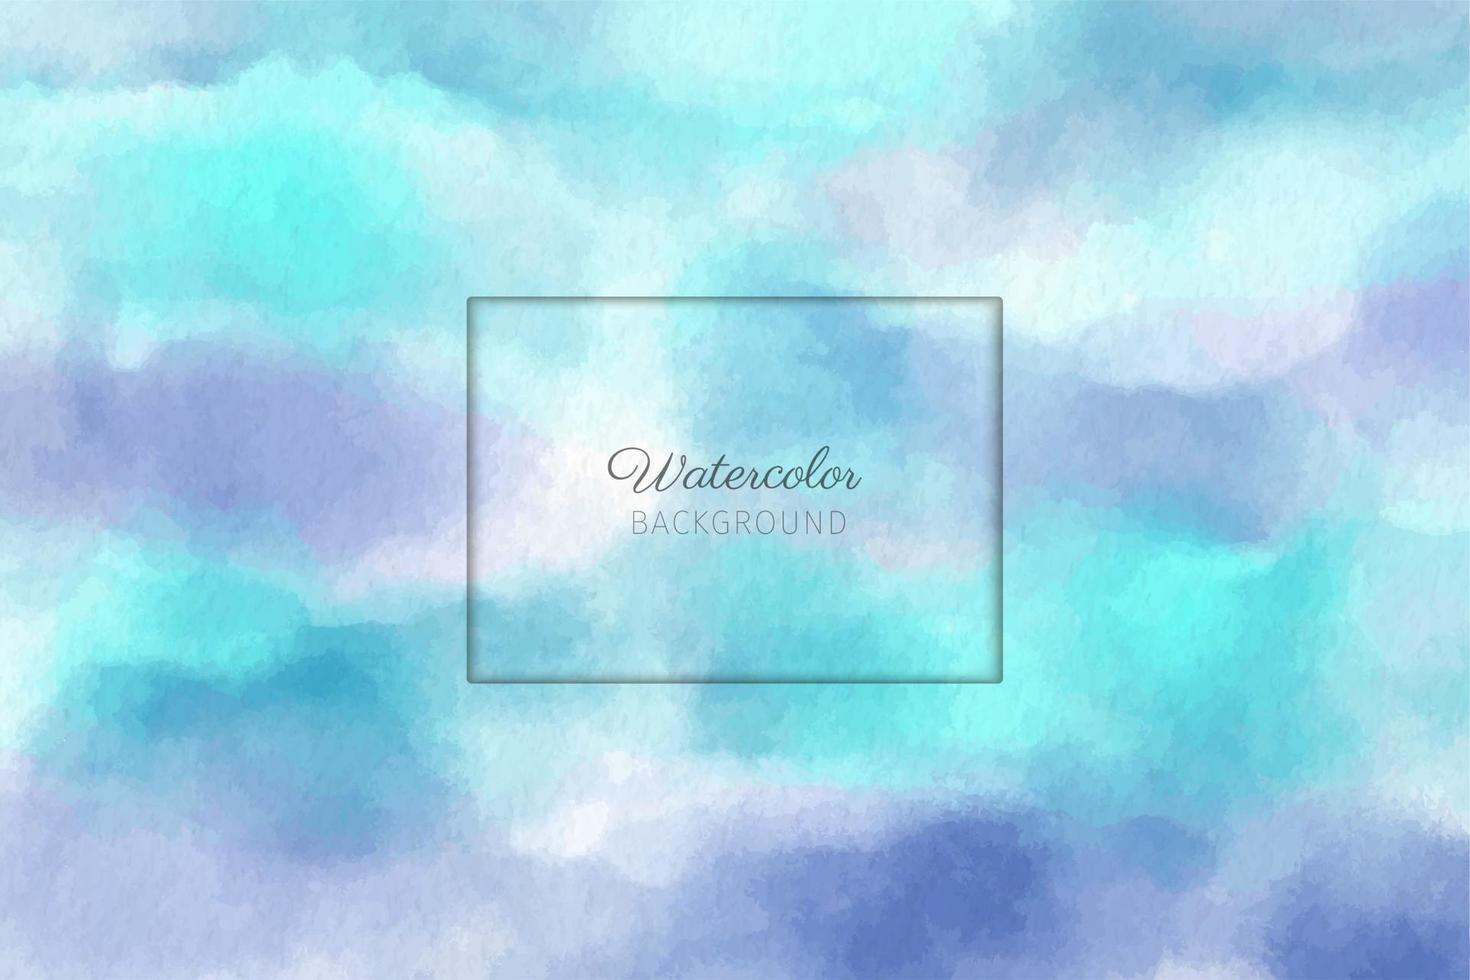 Teal and blue colors abstract watercolor background vector